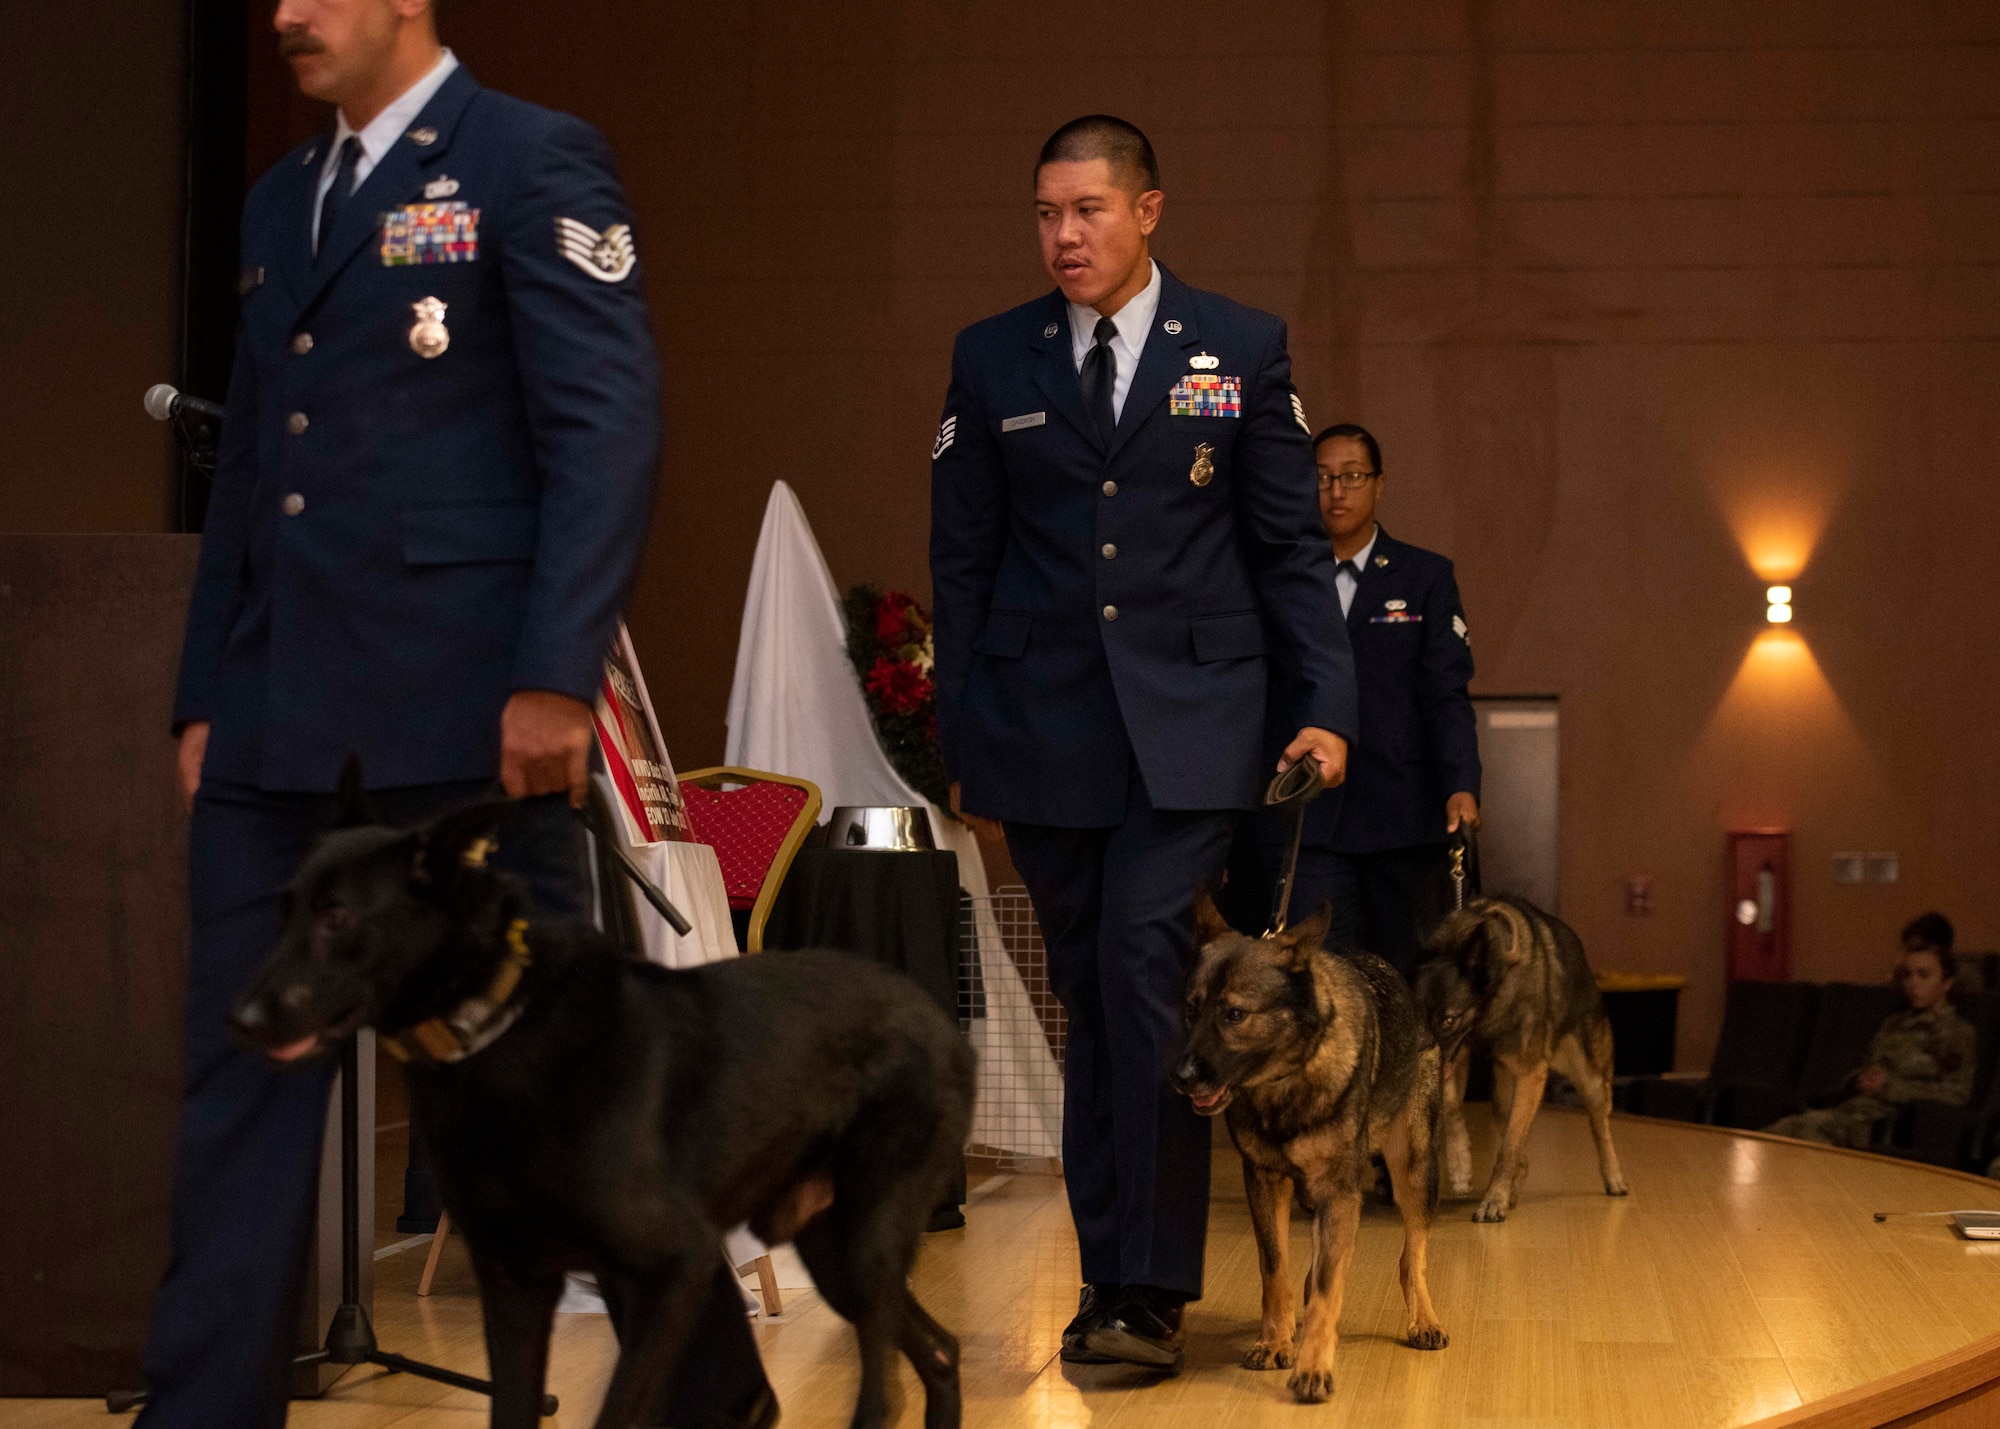 39th Security Forces Squadron military working dog handlers file off stage at the conclusion of a memorial ceremony for MWD Buck, Aug. 5, 2020, Incirlik Air Base, Turkey.